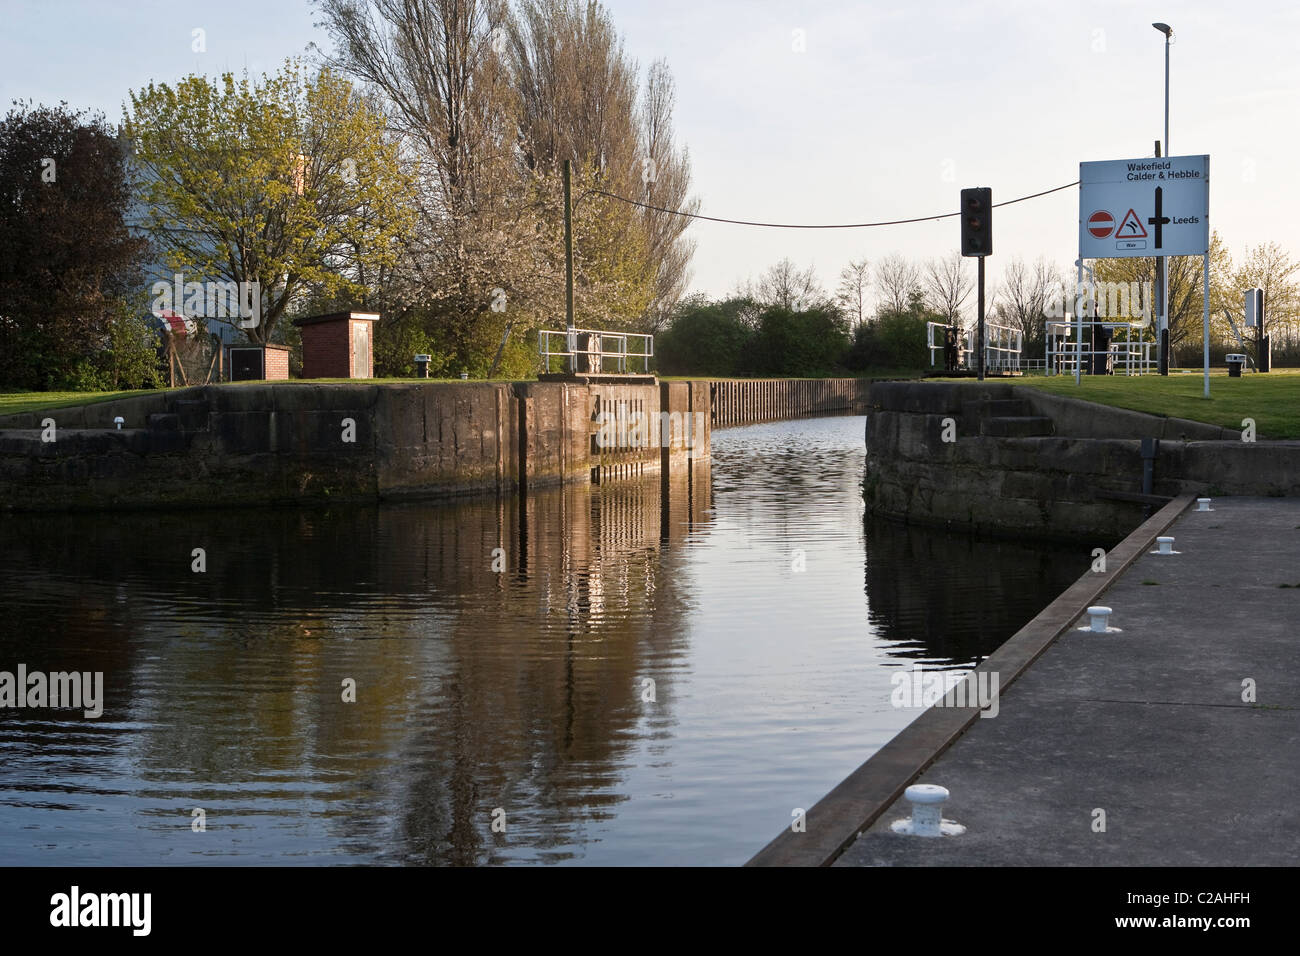 Castleford Lock on the Aire & Calder Navigation looking towards ...